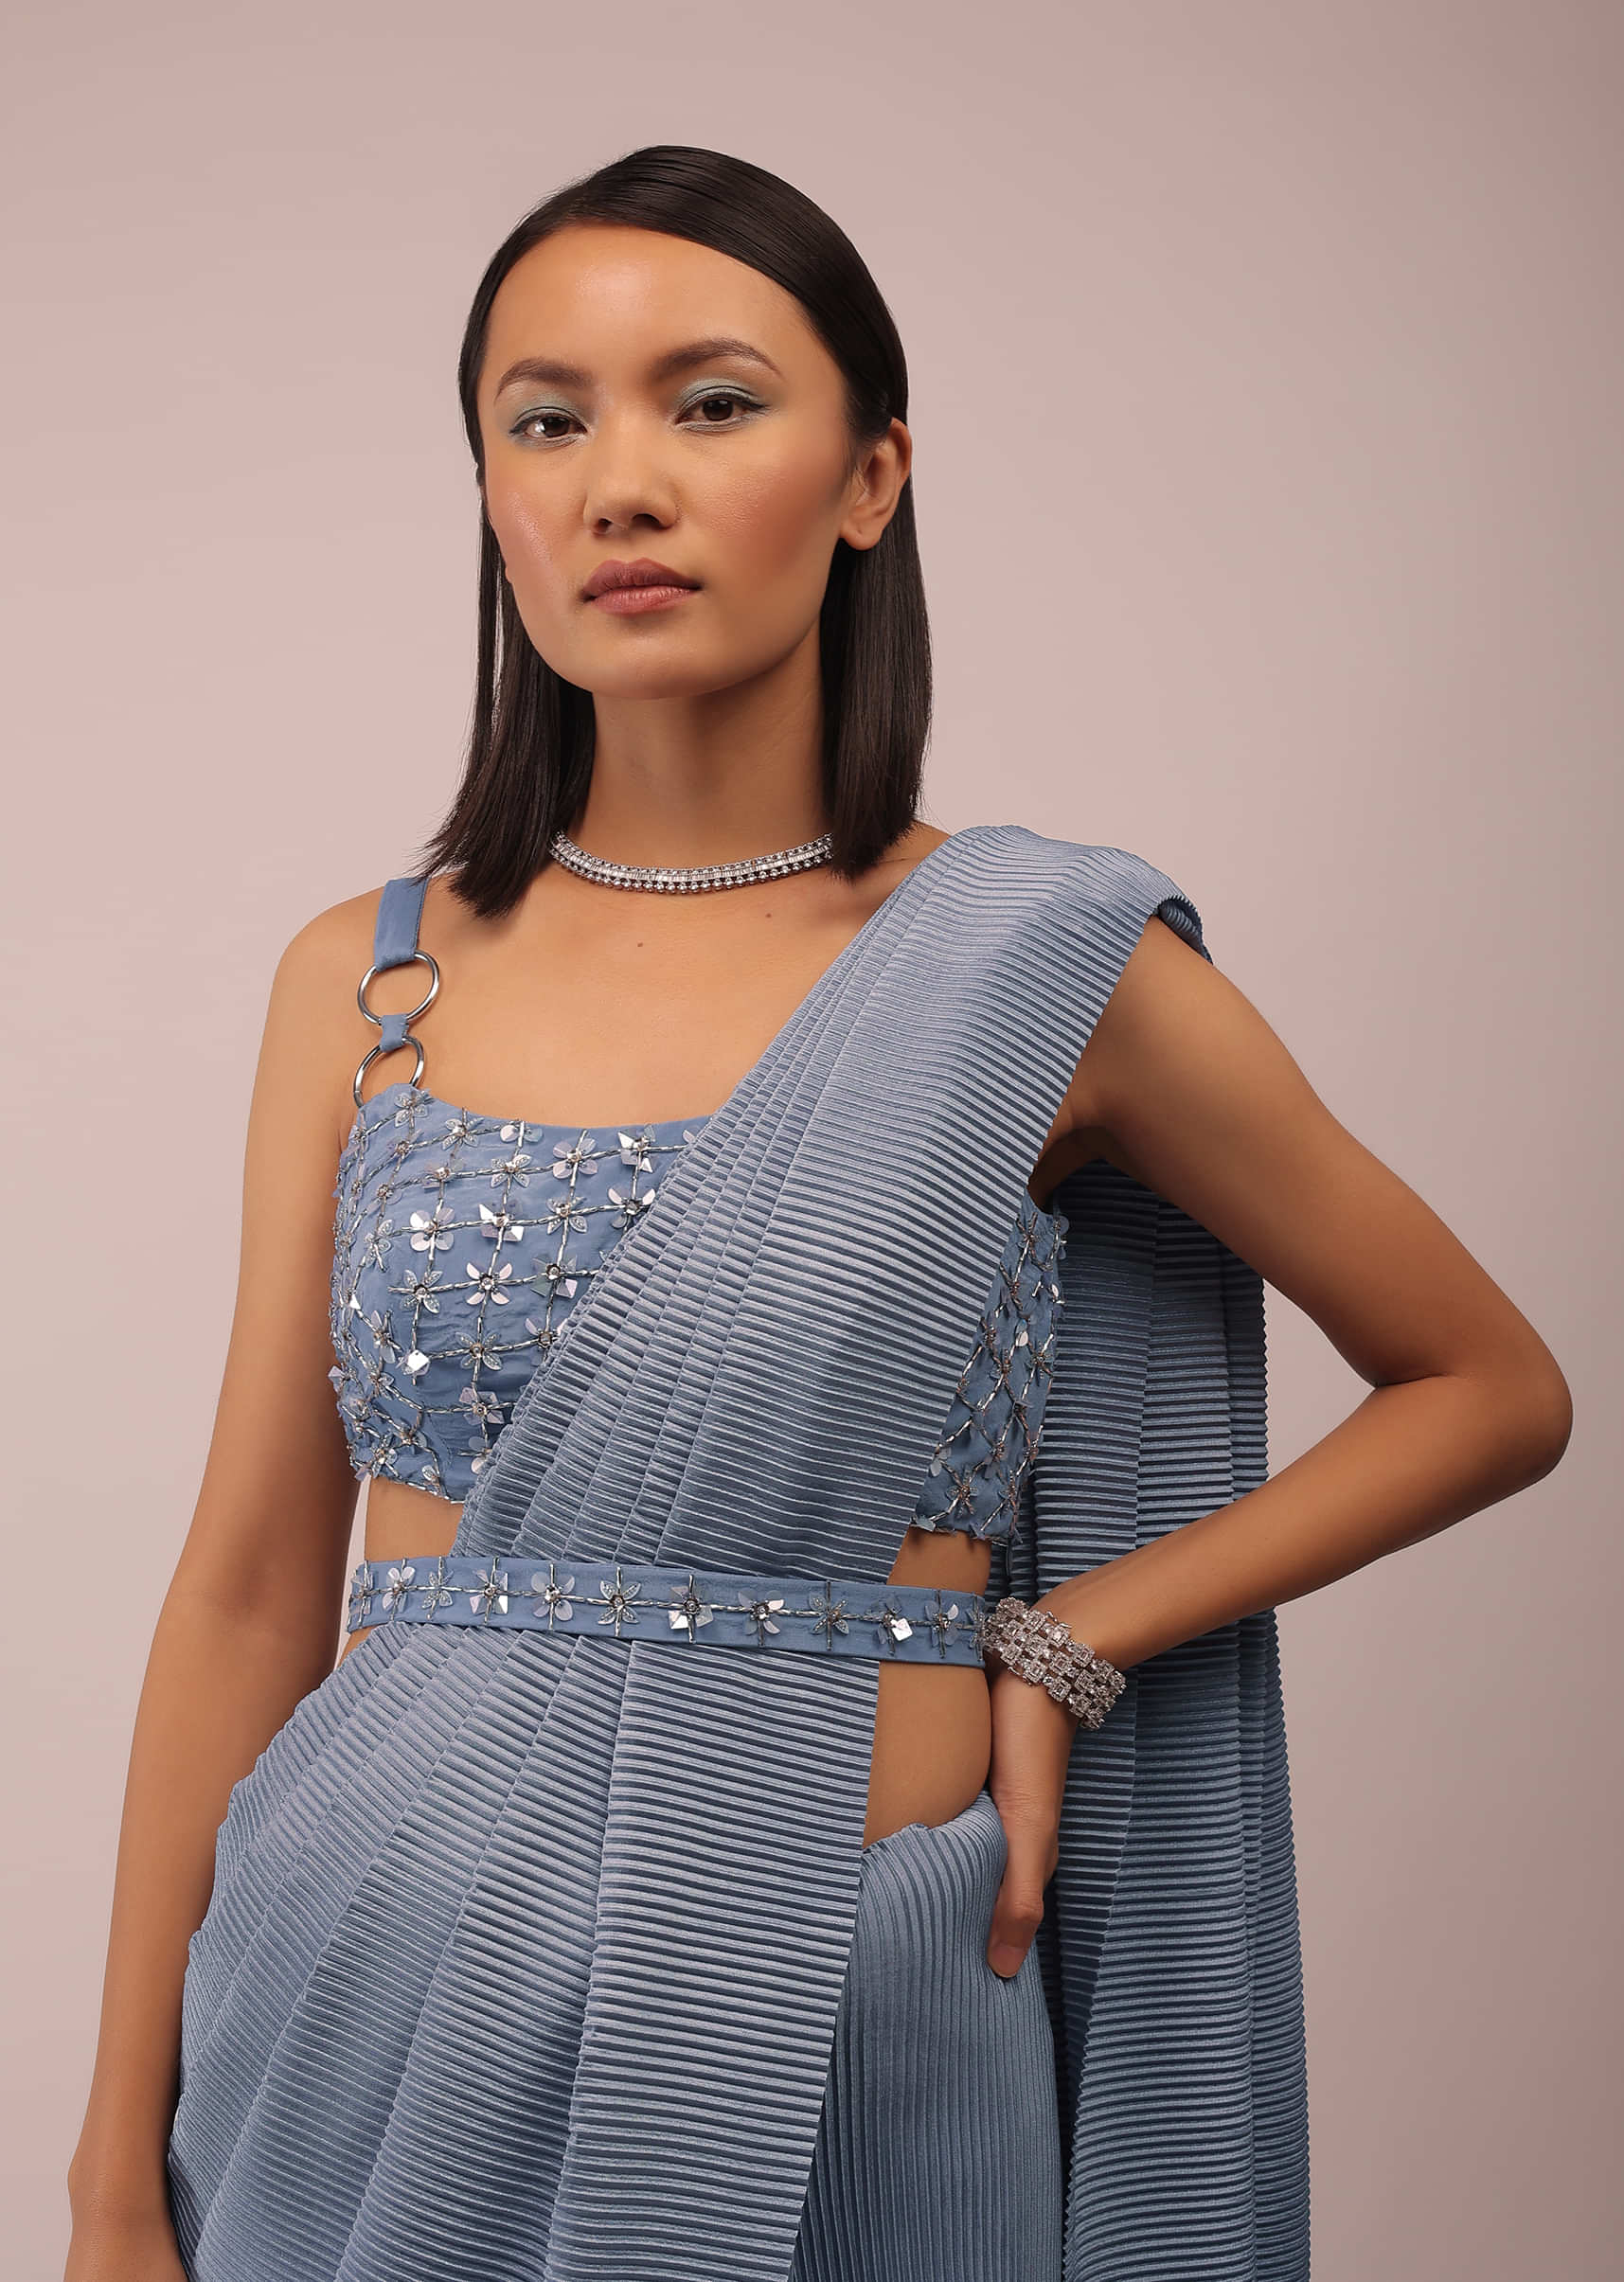 Faded Denim Saree With Buckle Strap Sleeves Crop Top In Sequins Embroidery With An Embroidery Belt In Sequins And 3D Petals